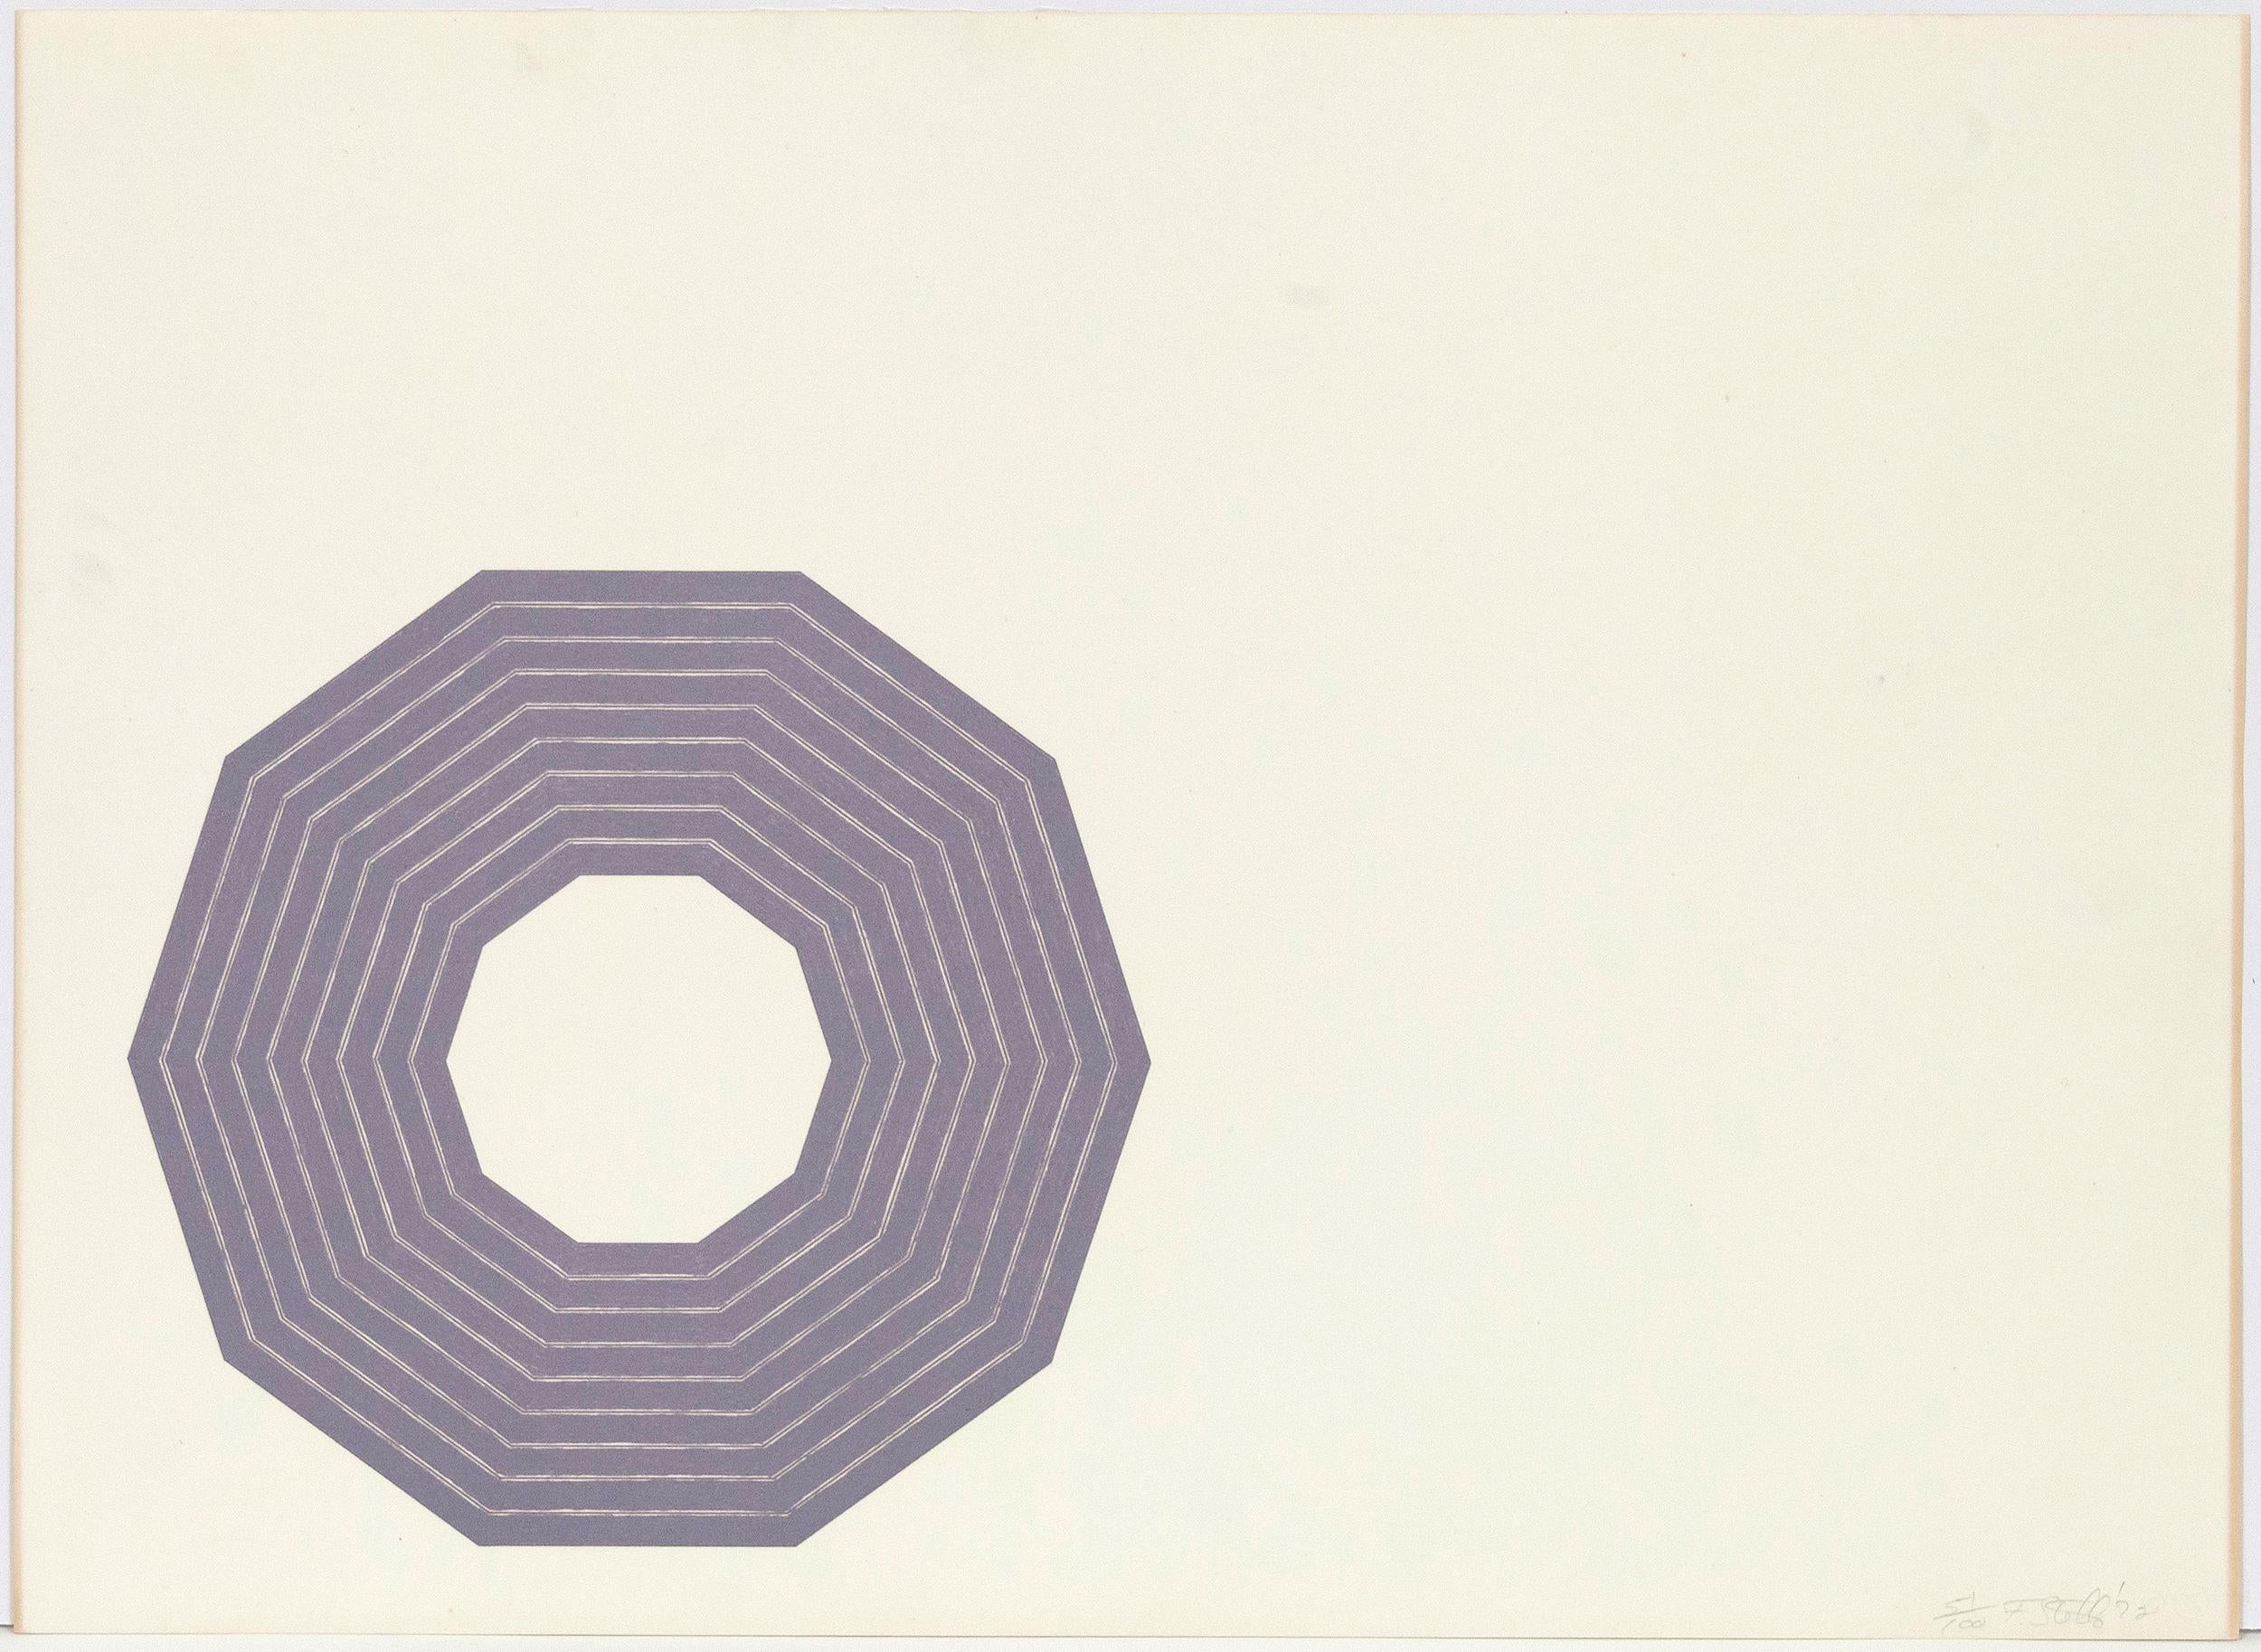 Caviar20 is proud to be offering this fine example of Frank Stella's early work.

Stella's work references many of the key developments or movements in post-war American painting; geometric abstraction, color field painting and Minimalism.

The